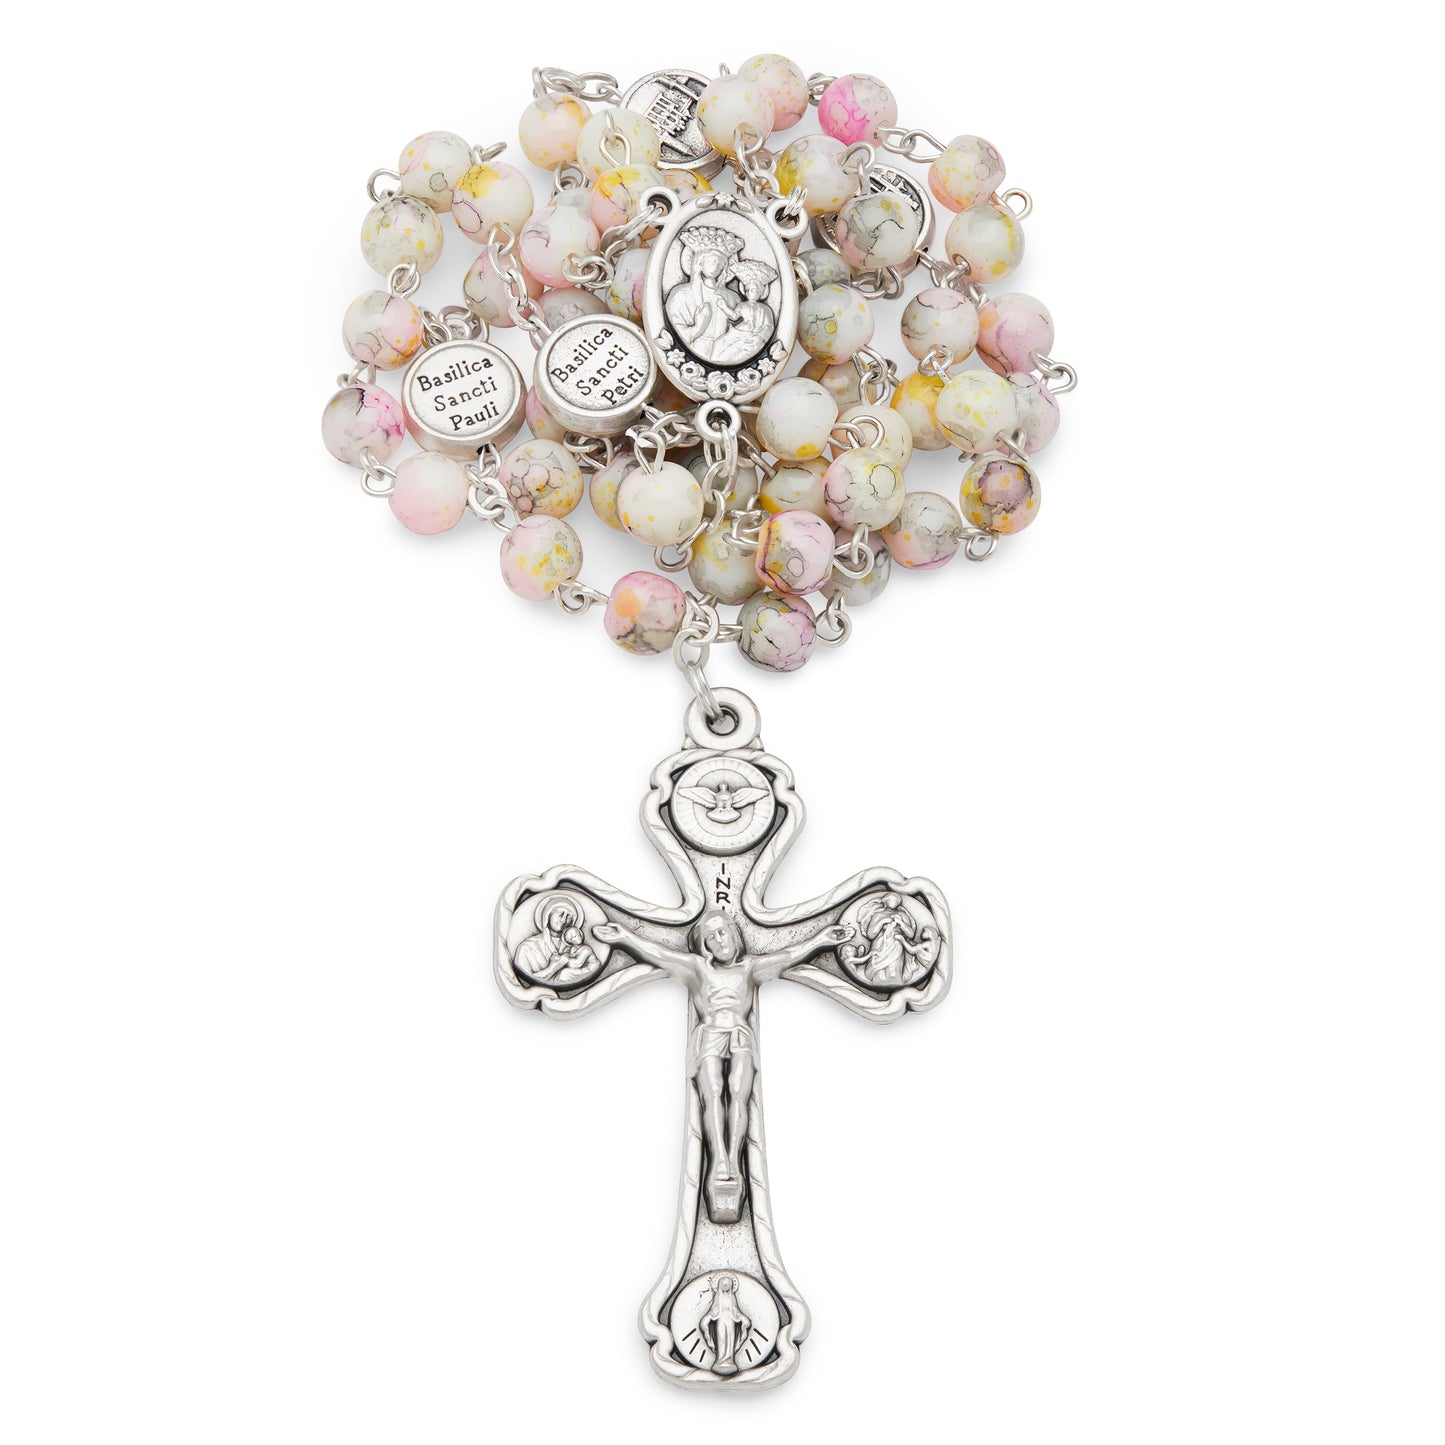 MONDO CATTOLICO Prayer Beads 48 cm (18.9 in) / 6 mm (0.24 in) White Variegated Five Decades Rosary